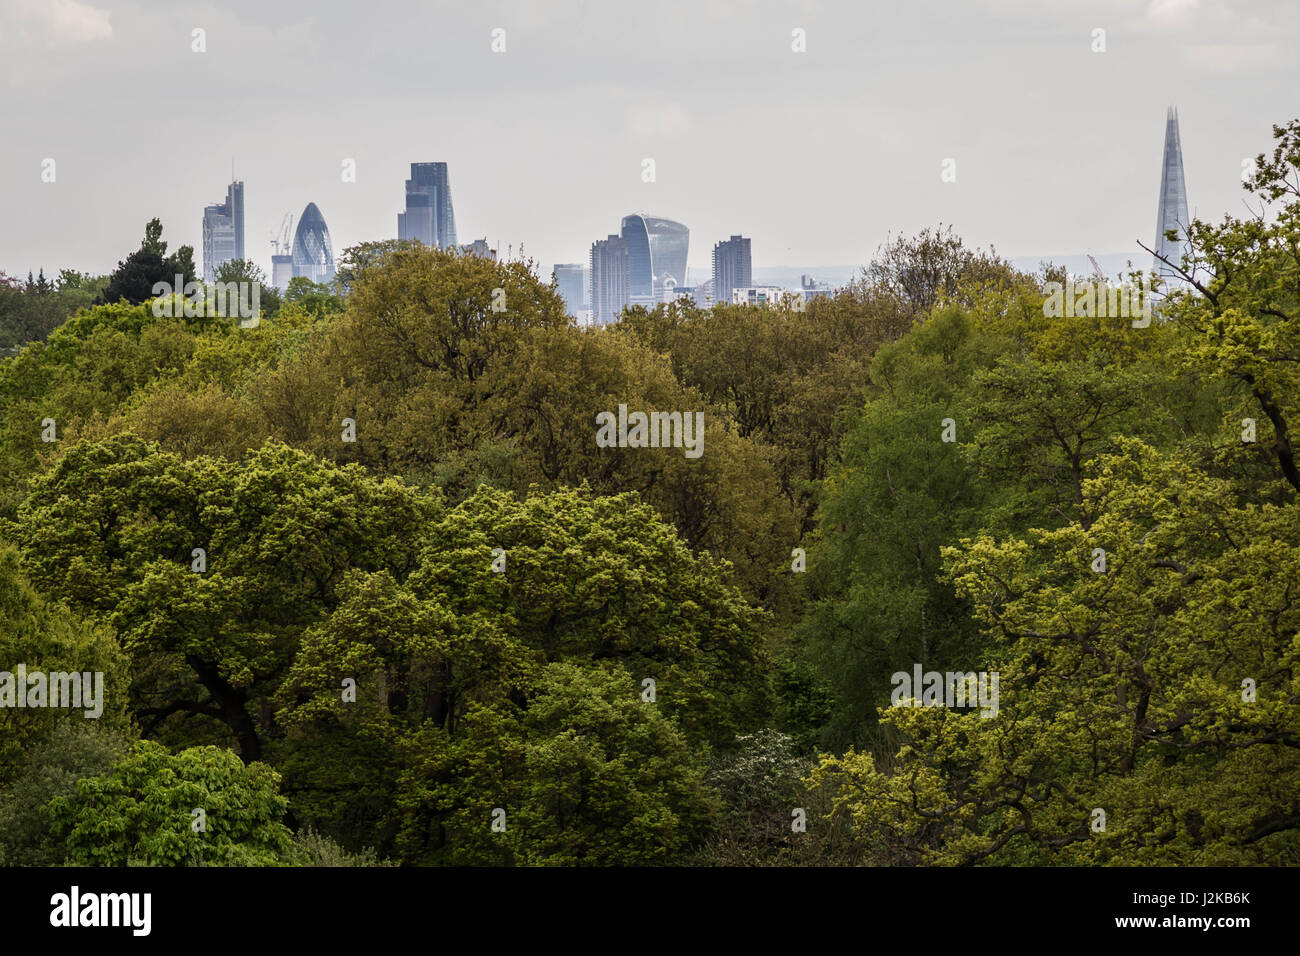 (L-R) Guerkin, Cheesegrater, Walkie-Talkie and Shard buildings seen over treetops from Hampsted Heath park in north west London, UK. Stock Photo